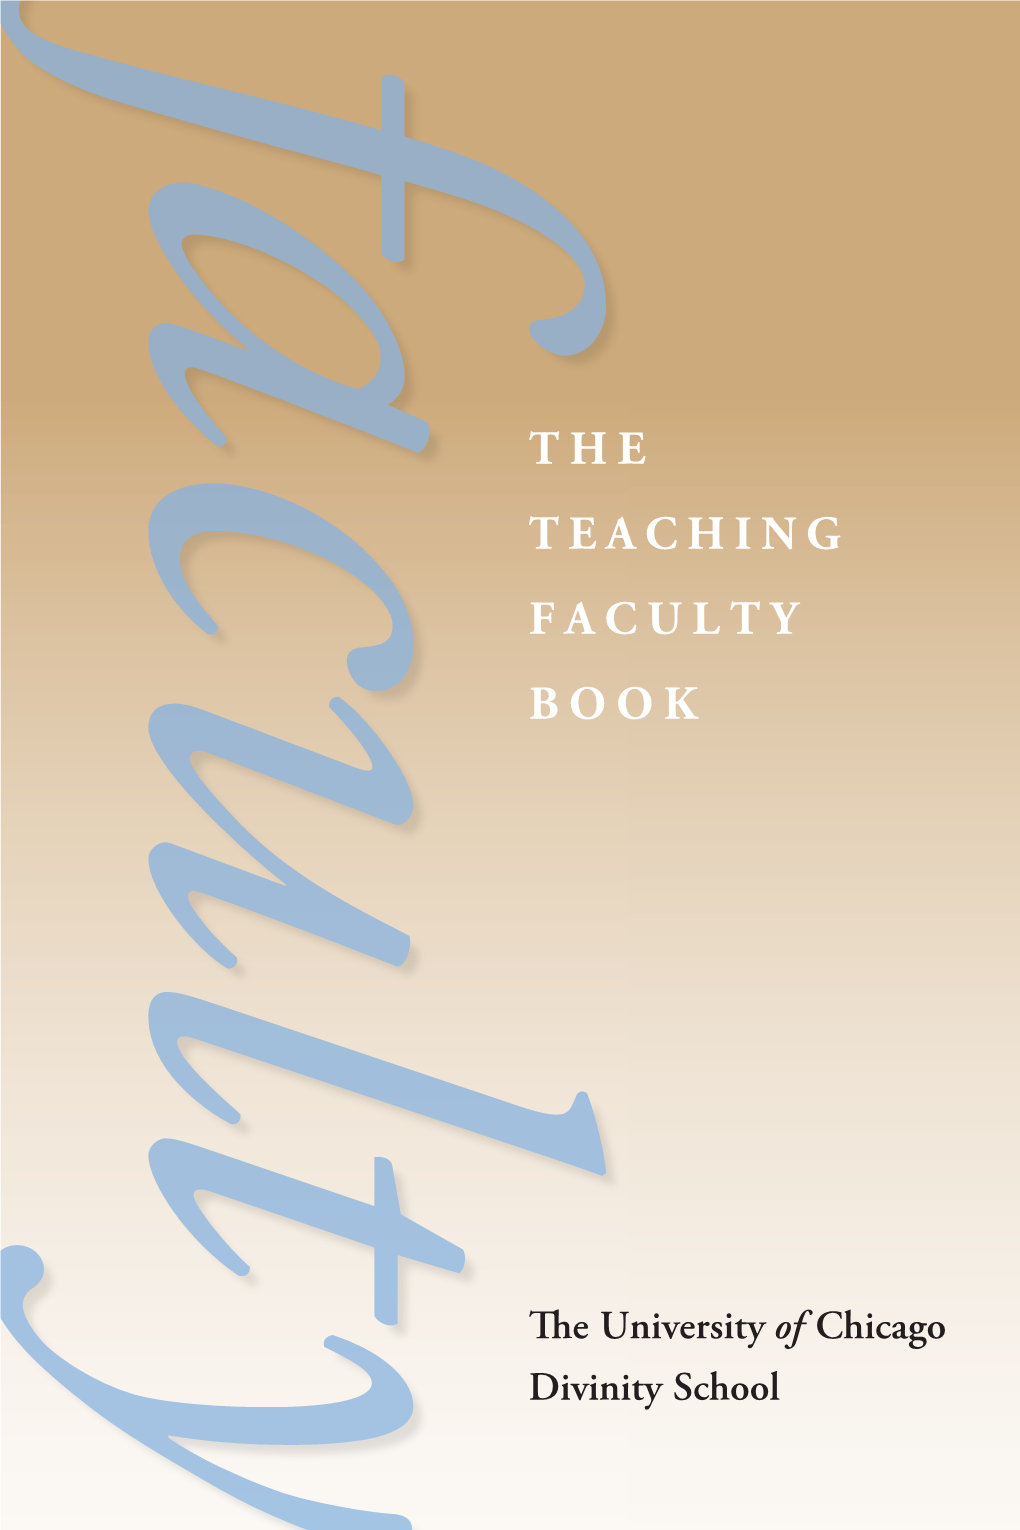 Download the Teaching Faculty Book